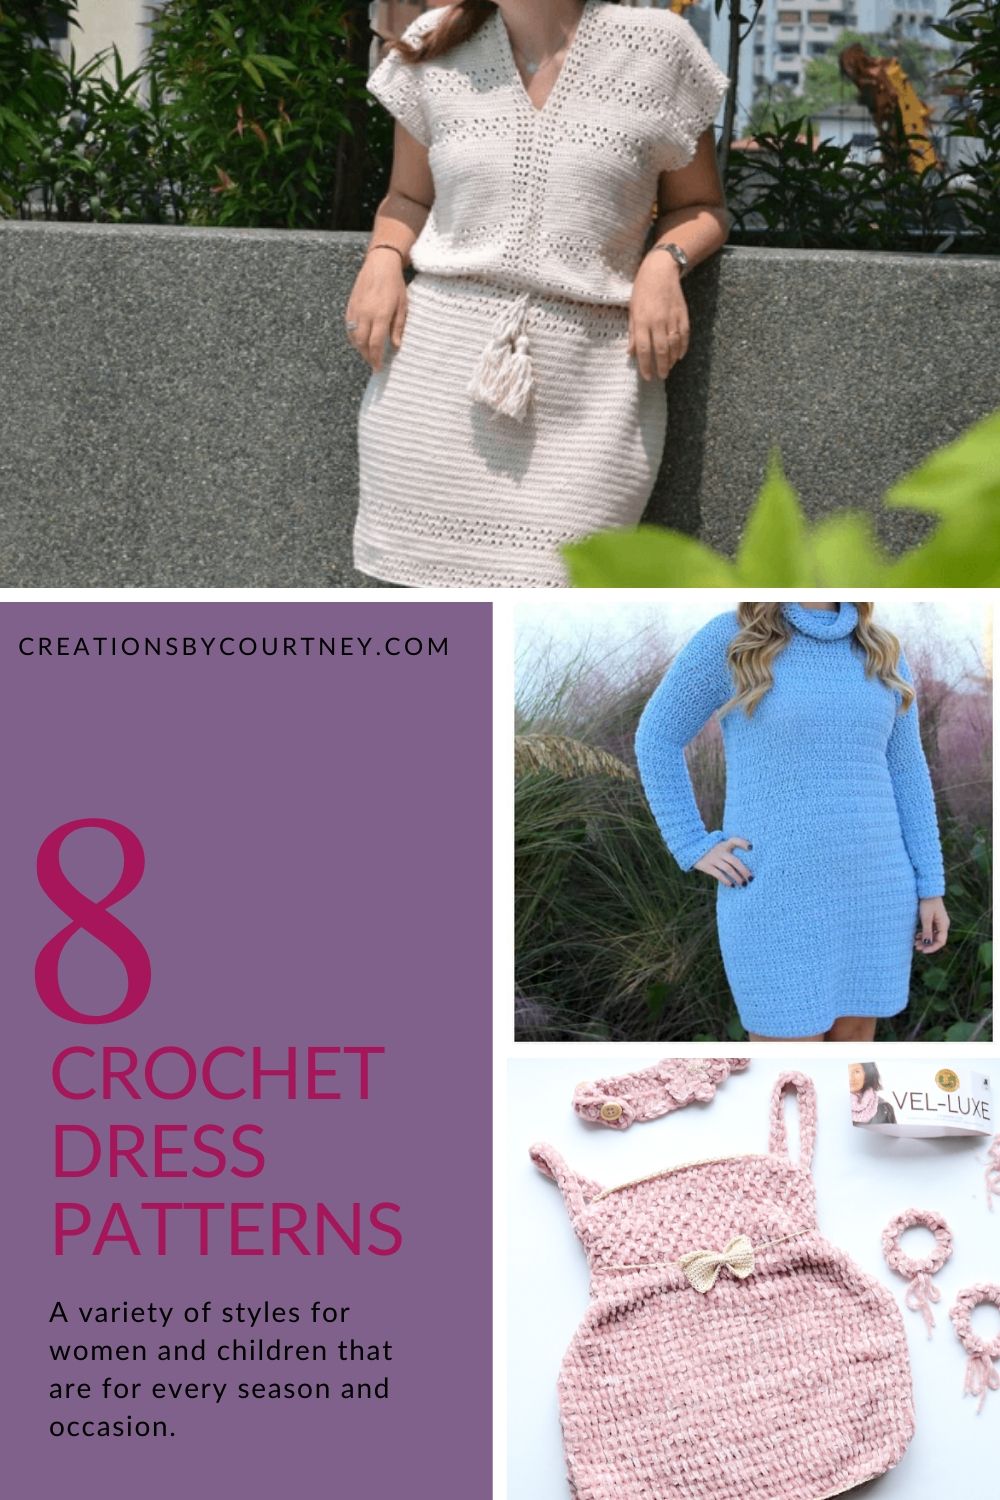 Check out this collection of crochet dress patterns to fit every size and style. From lacy details to tunic styles for cooler weather, and even a tunisian dress for babies. #crochetpatternroundup #crochetpatterns #crochetgarment #crochetdress